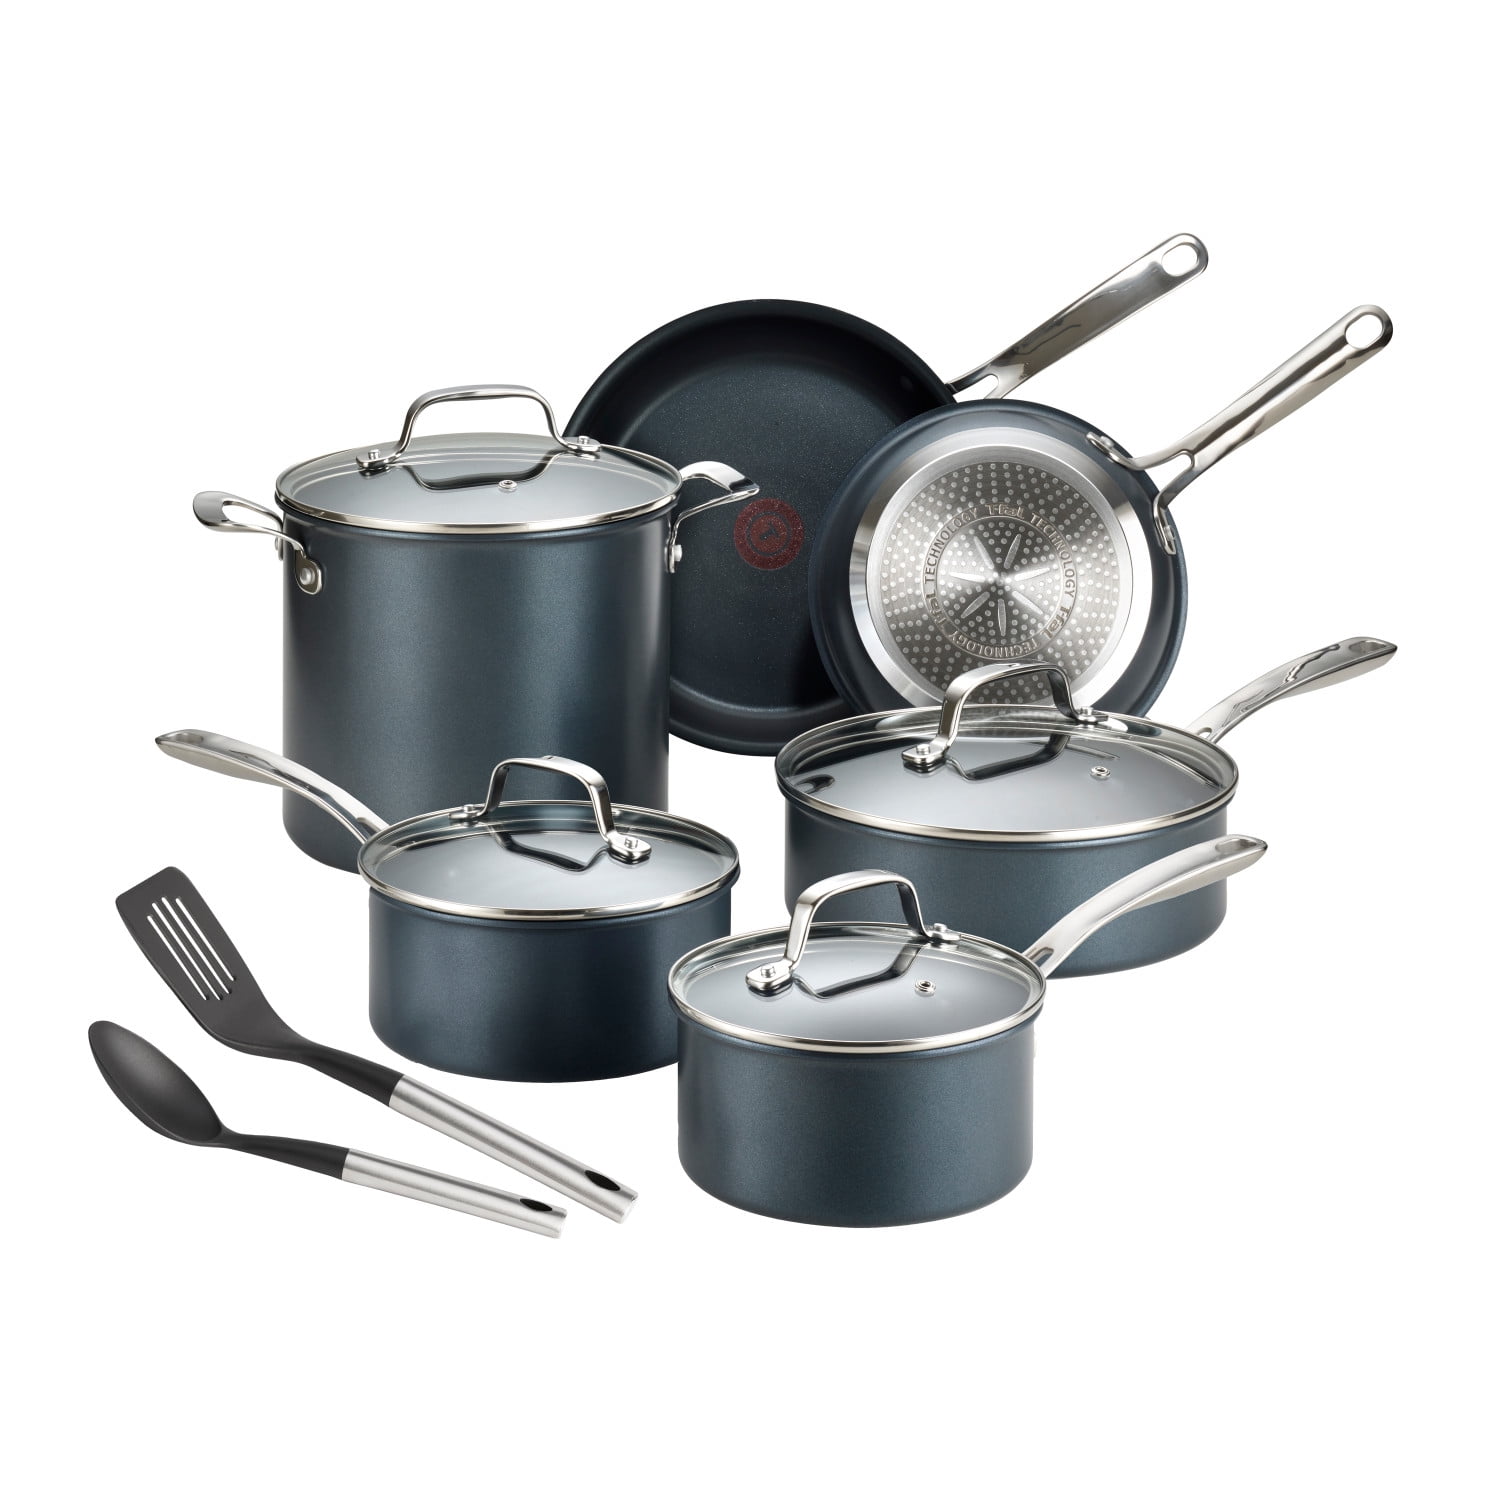 T-FAL T-fal Ingenio The Genius Cooking System, Platinum Non-Stick, 14 Pc  Cookware Set, Forest Green L819SE64